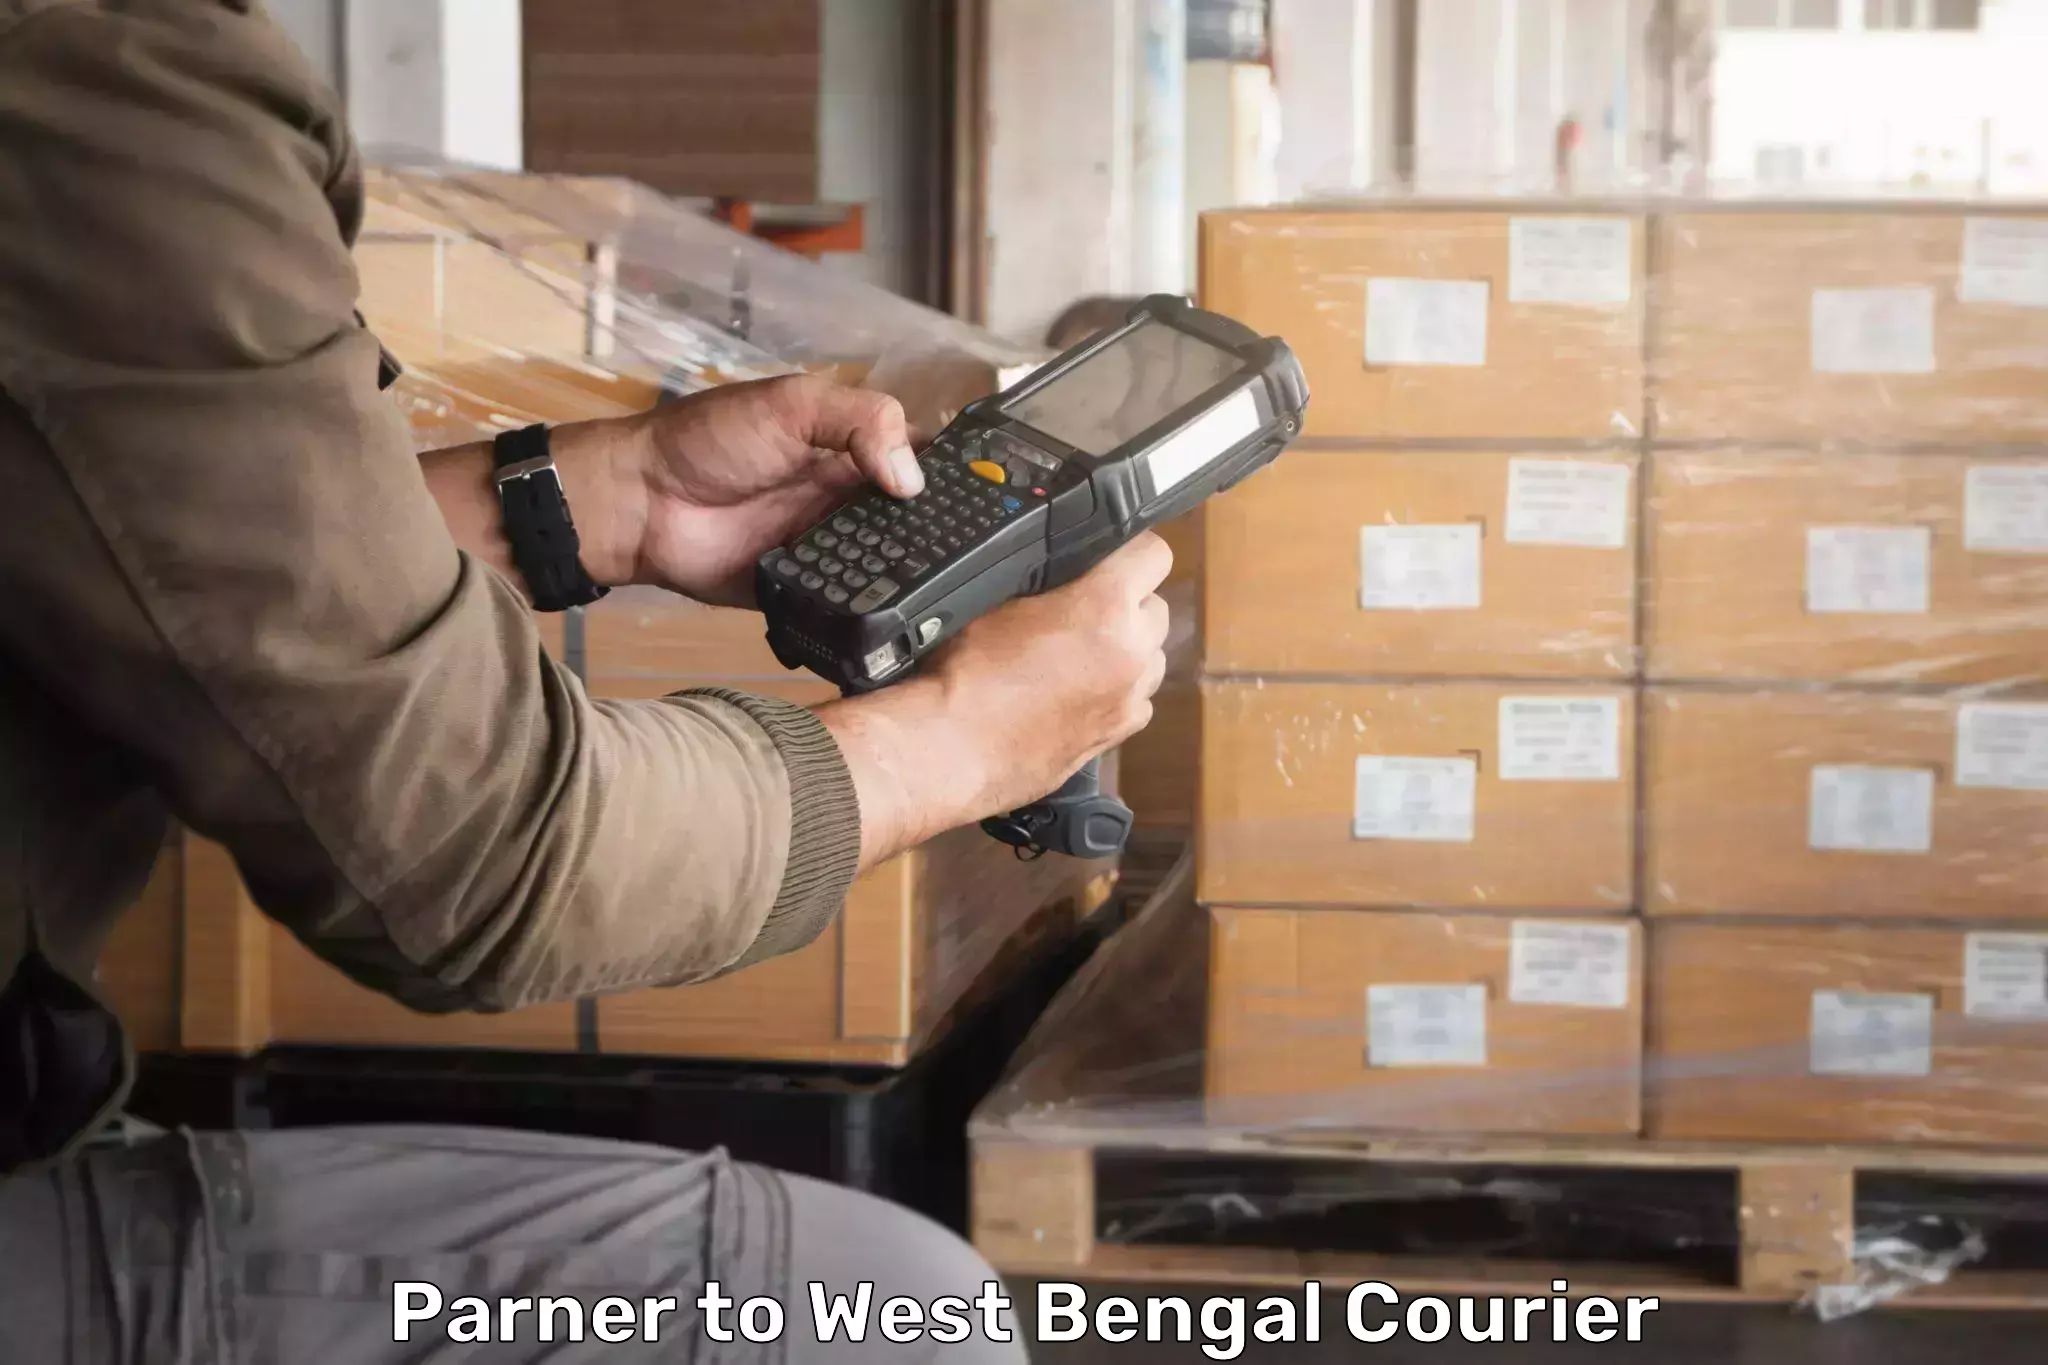 Advanced shipping network Parner to West Bengal